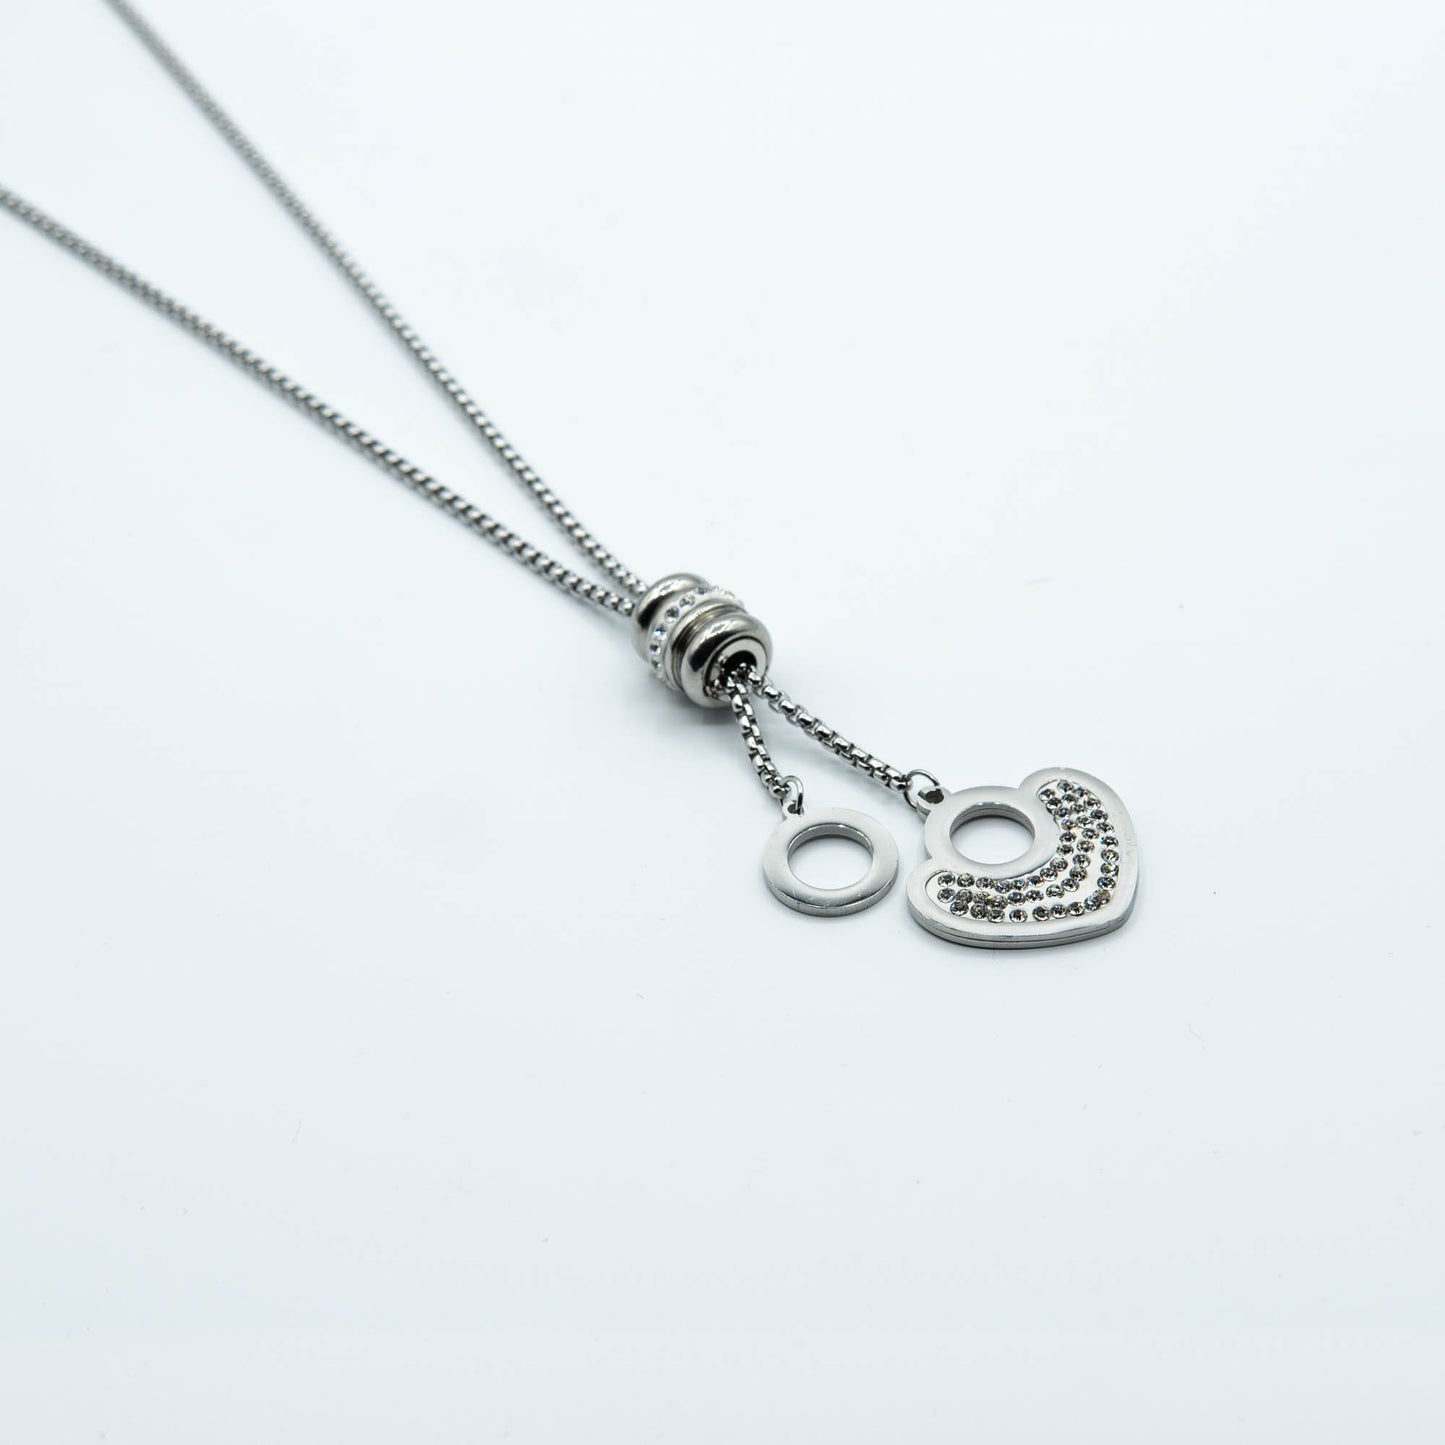 AVY - stainless steel adjustable necklace